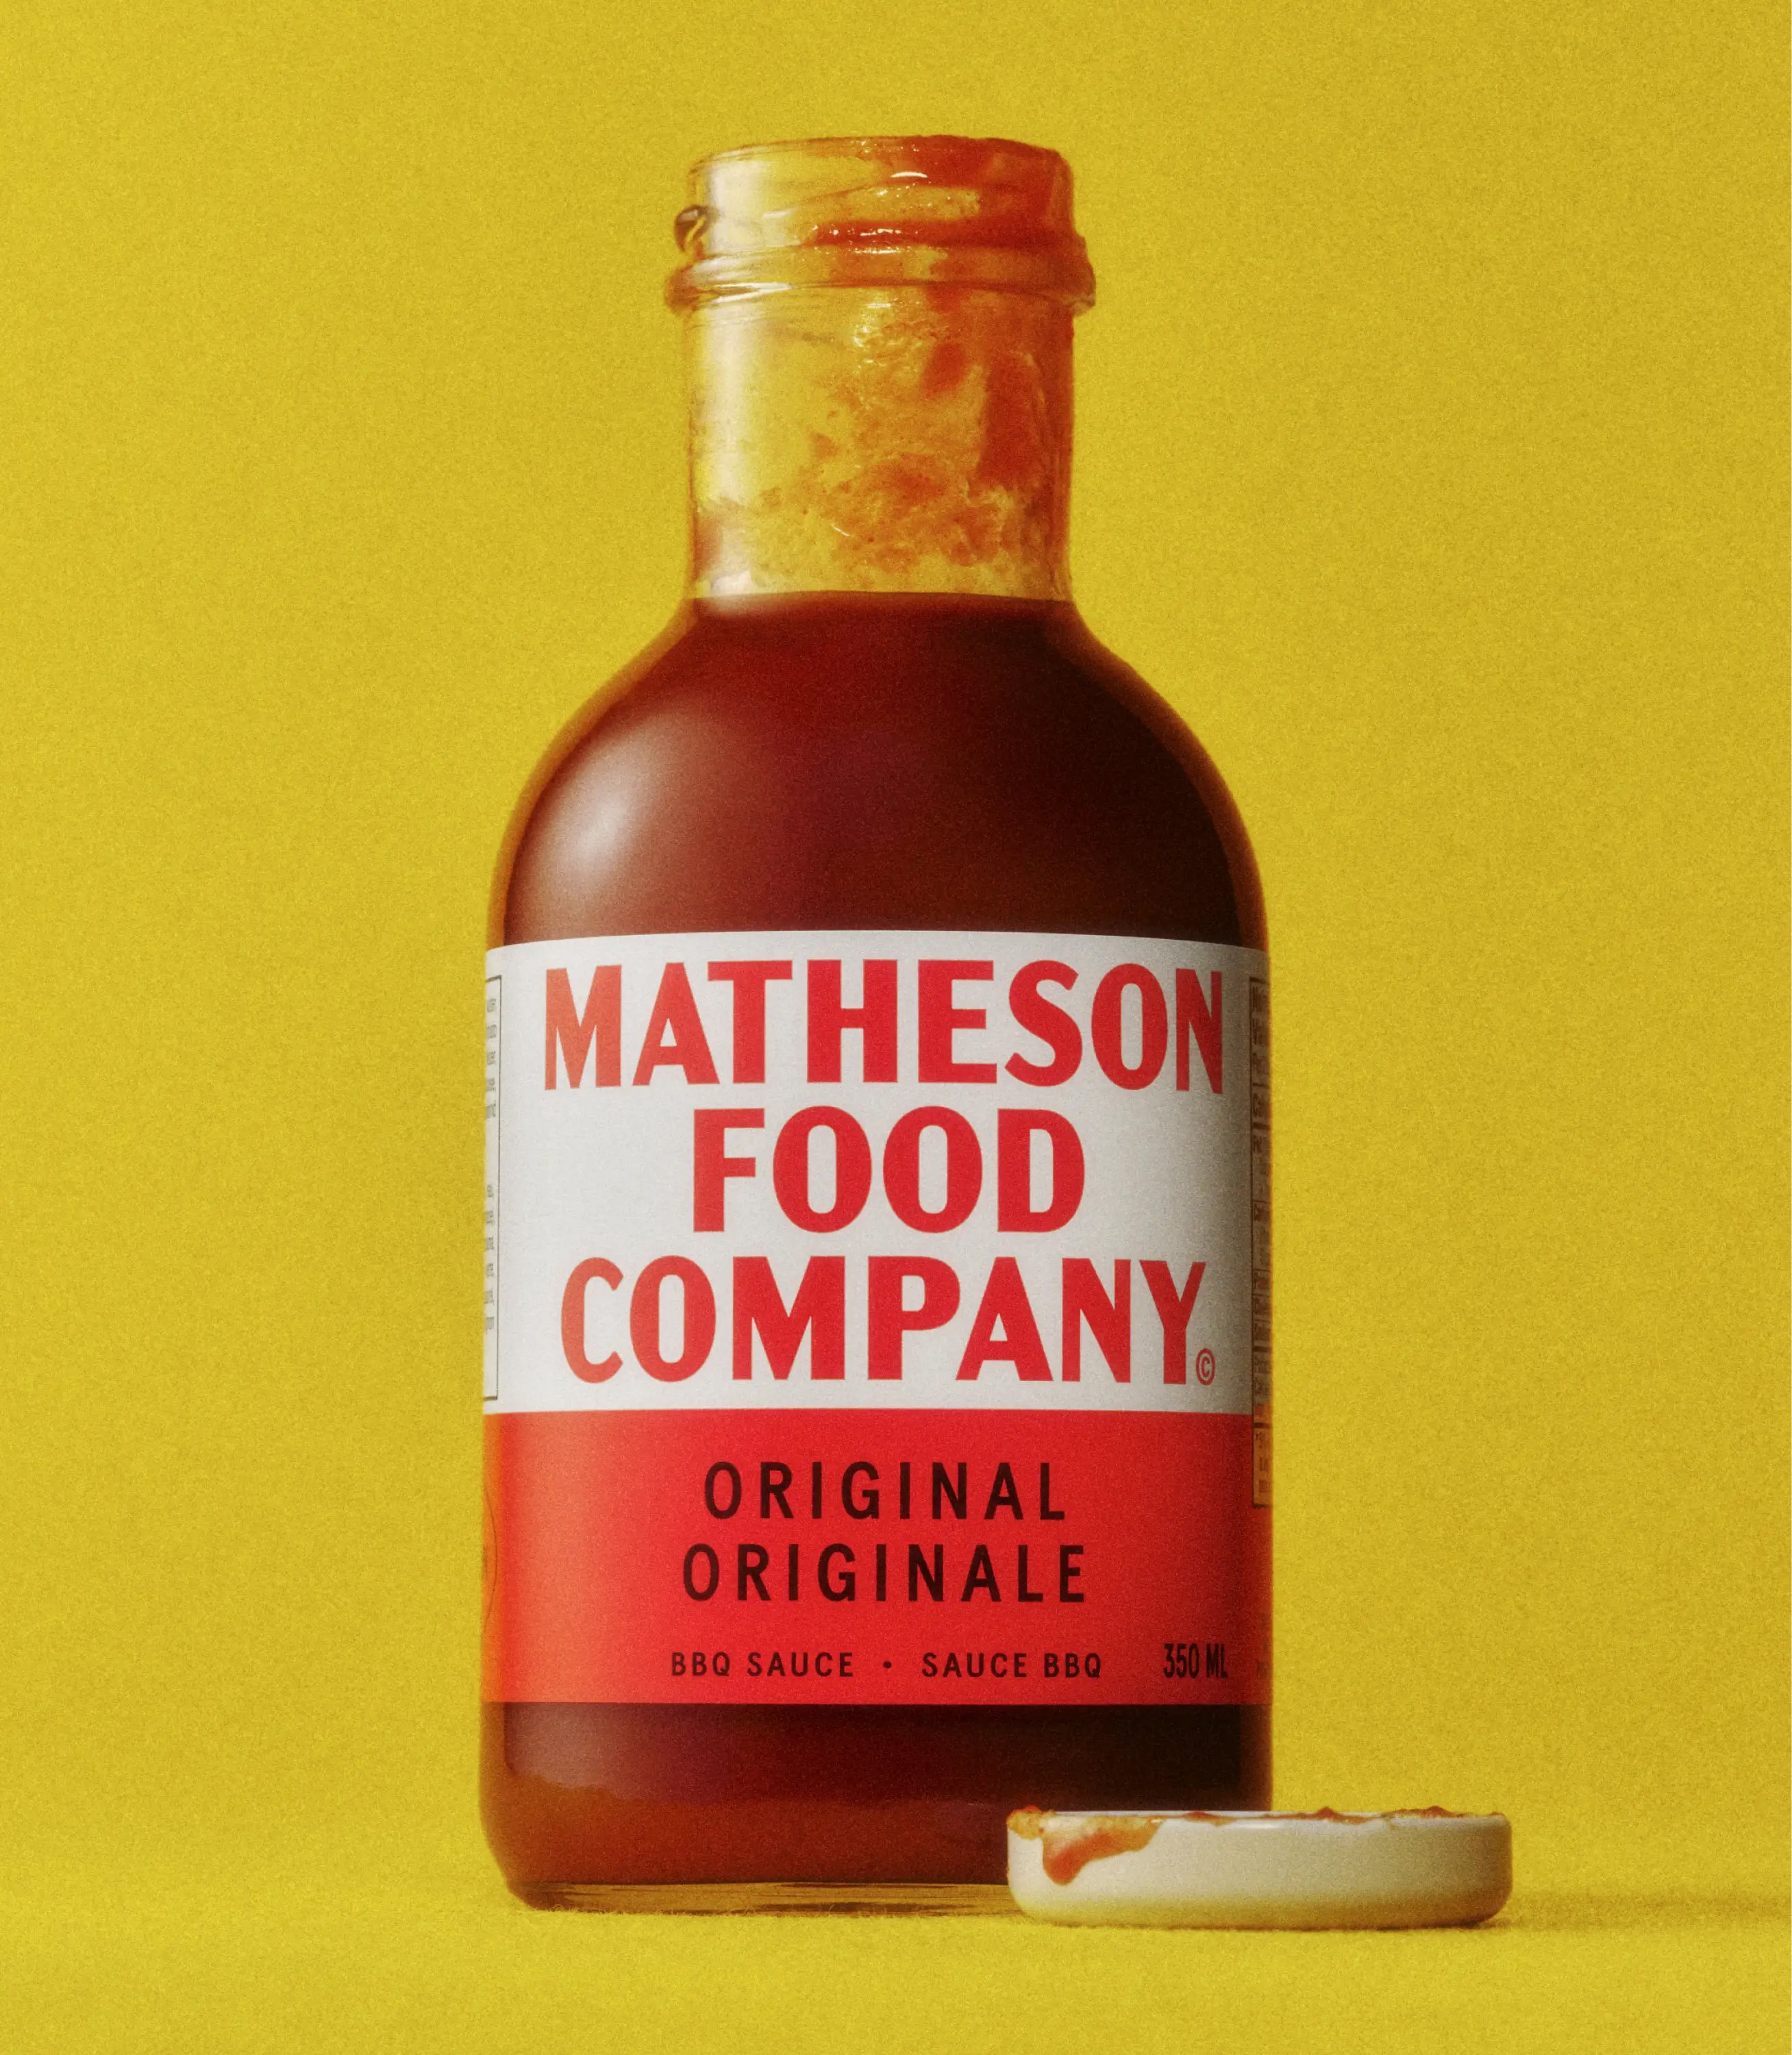 Logotype, social assets, website, art direction, tone of voice and digital design for Matheson Food Company designed by Wedge